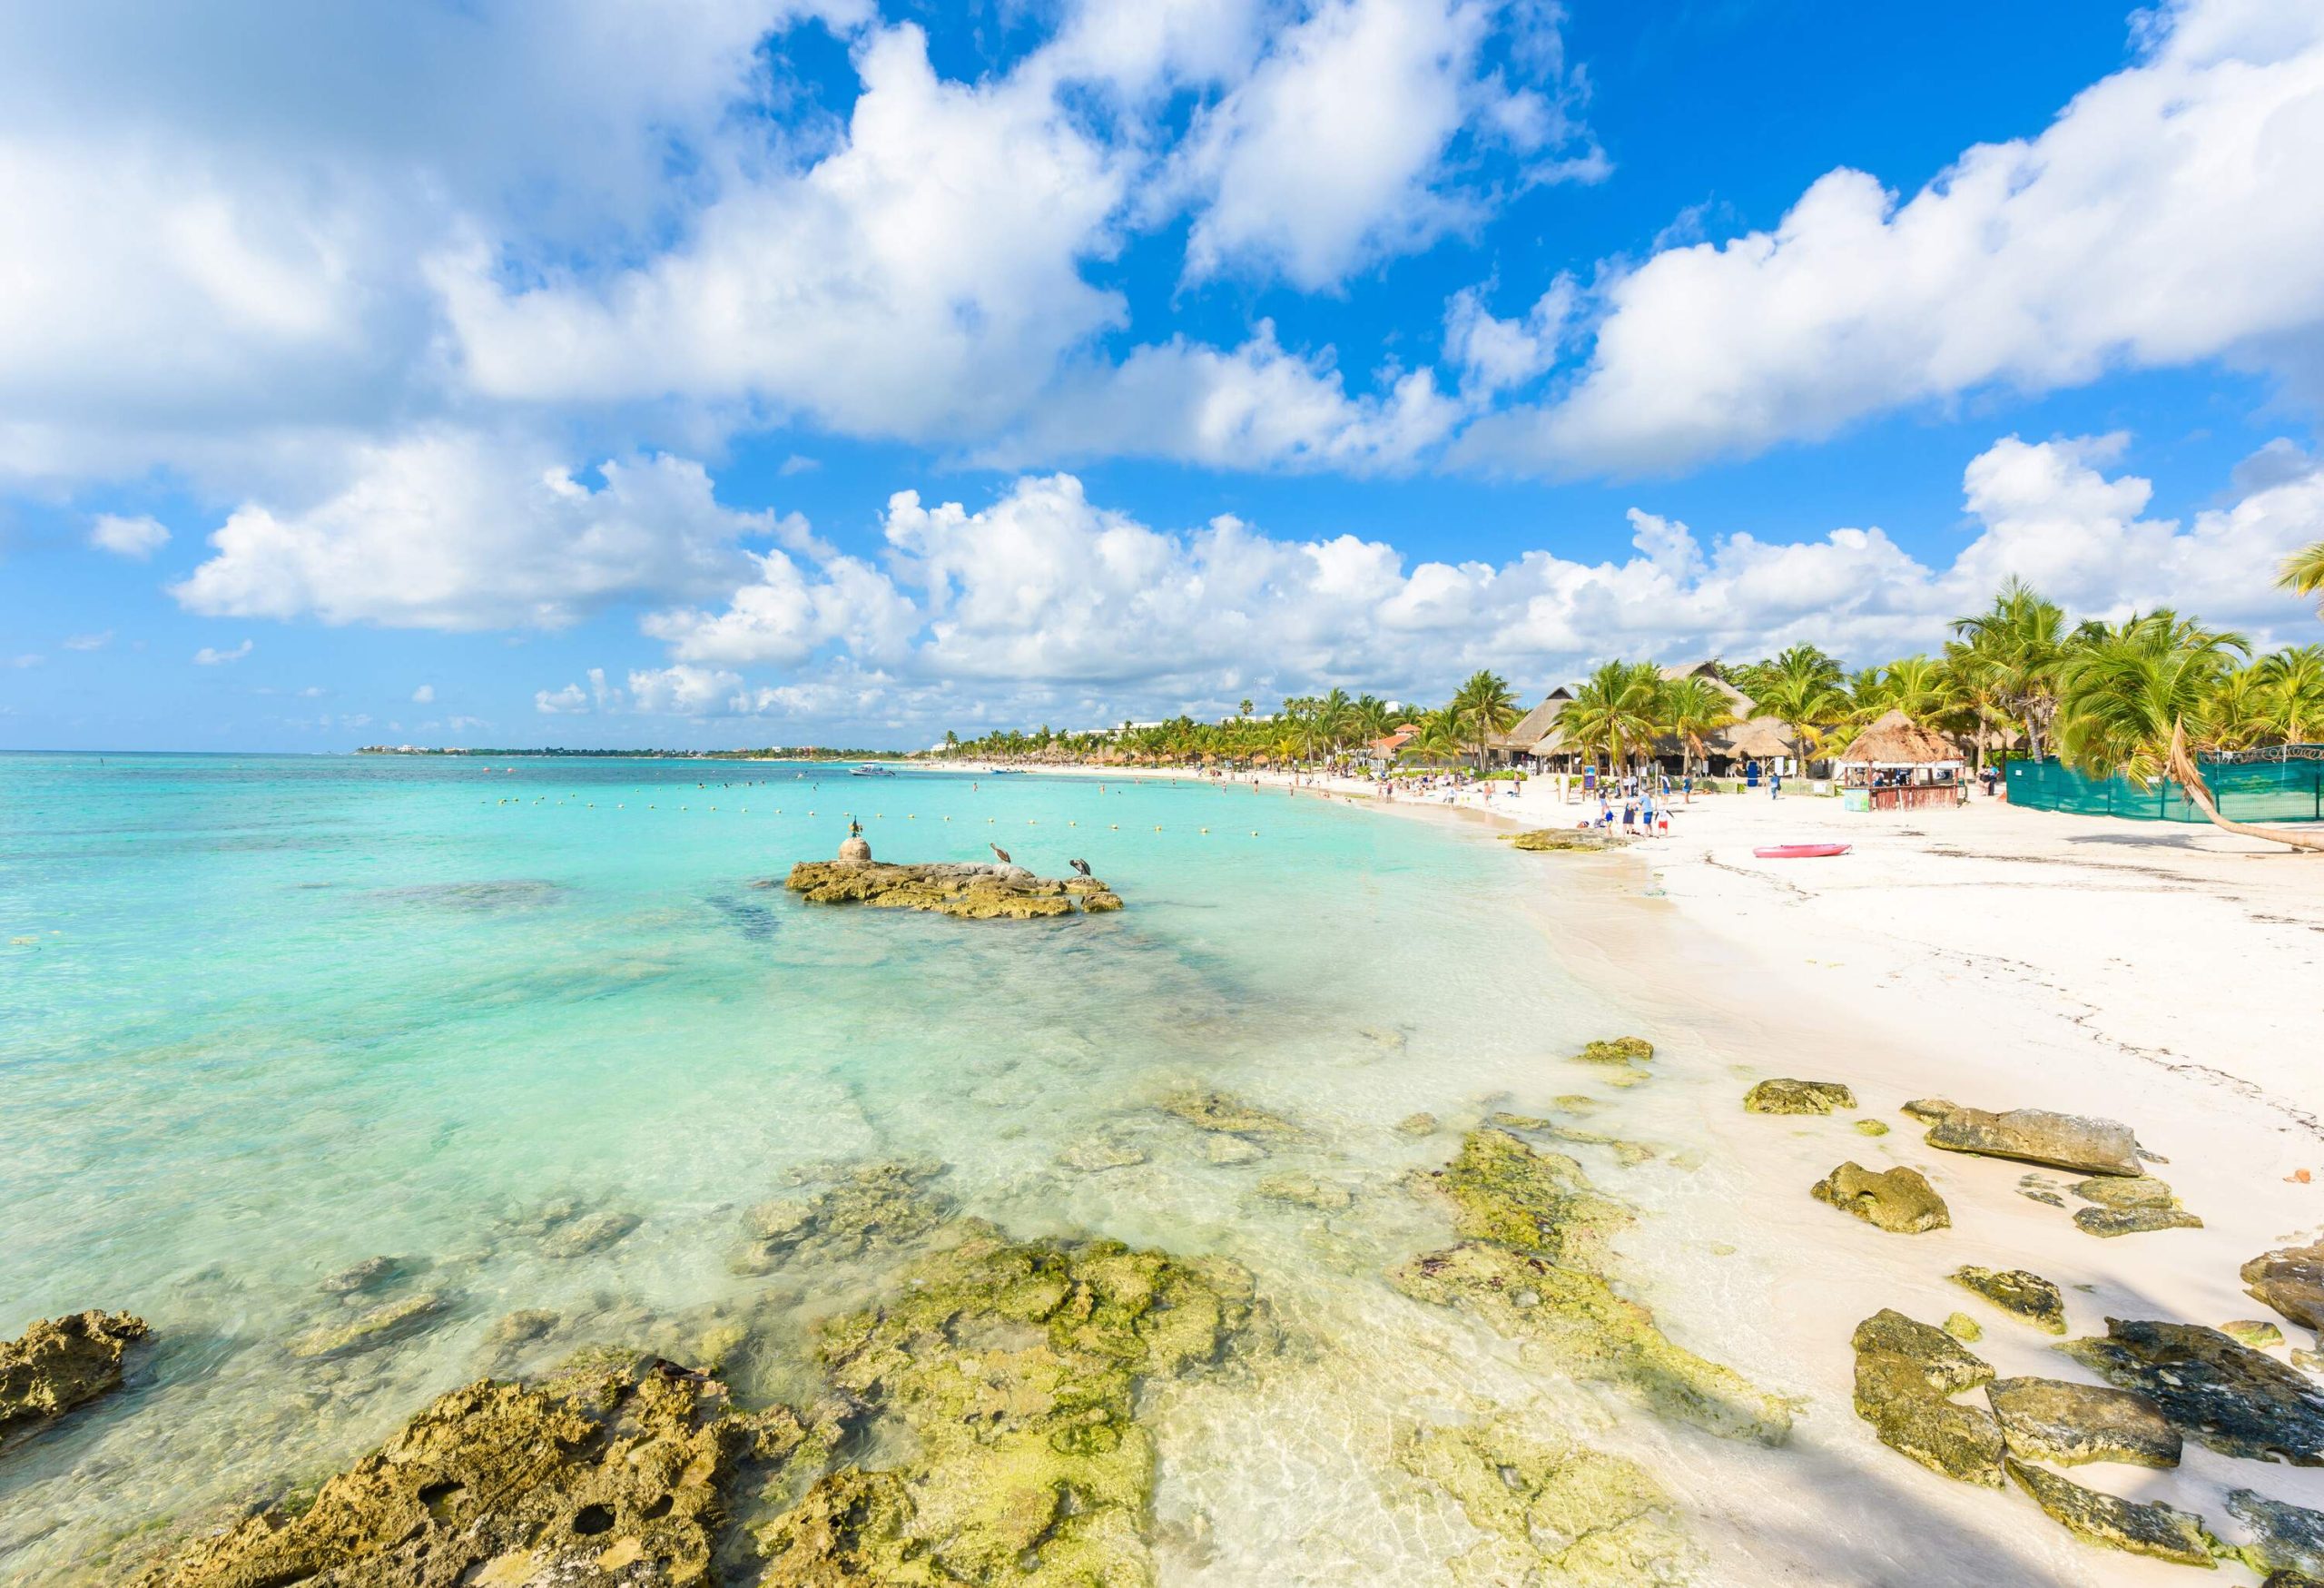 A picturesque long beach with crystal clear turquoise water and fine white sands bordered by a rocky shore.